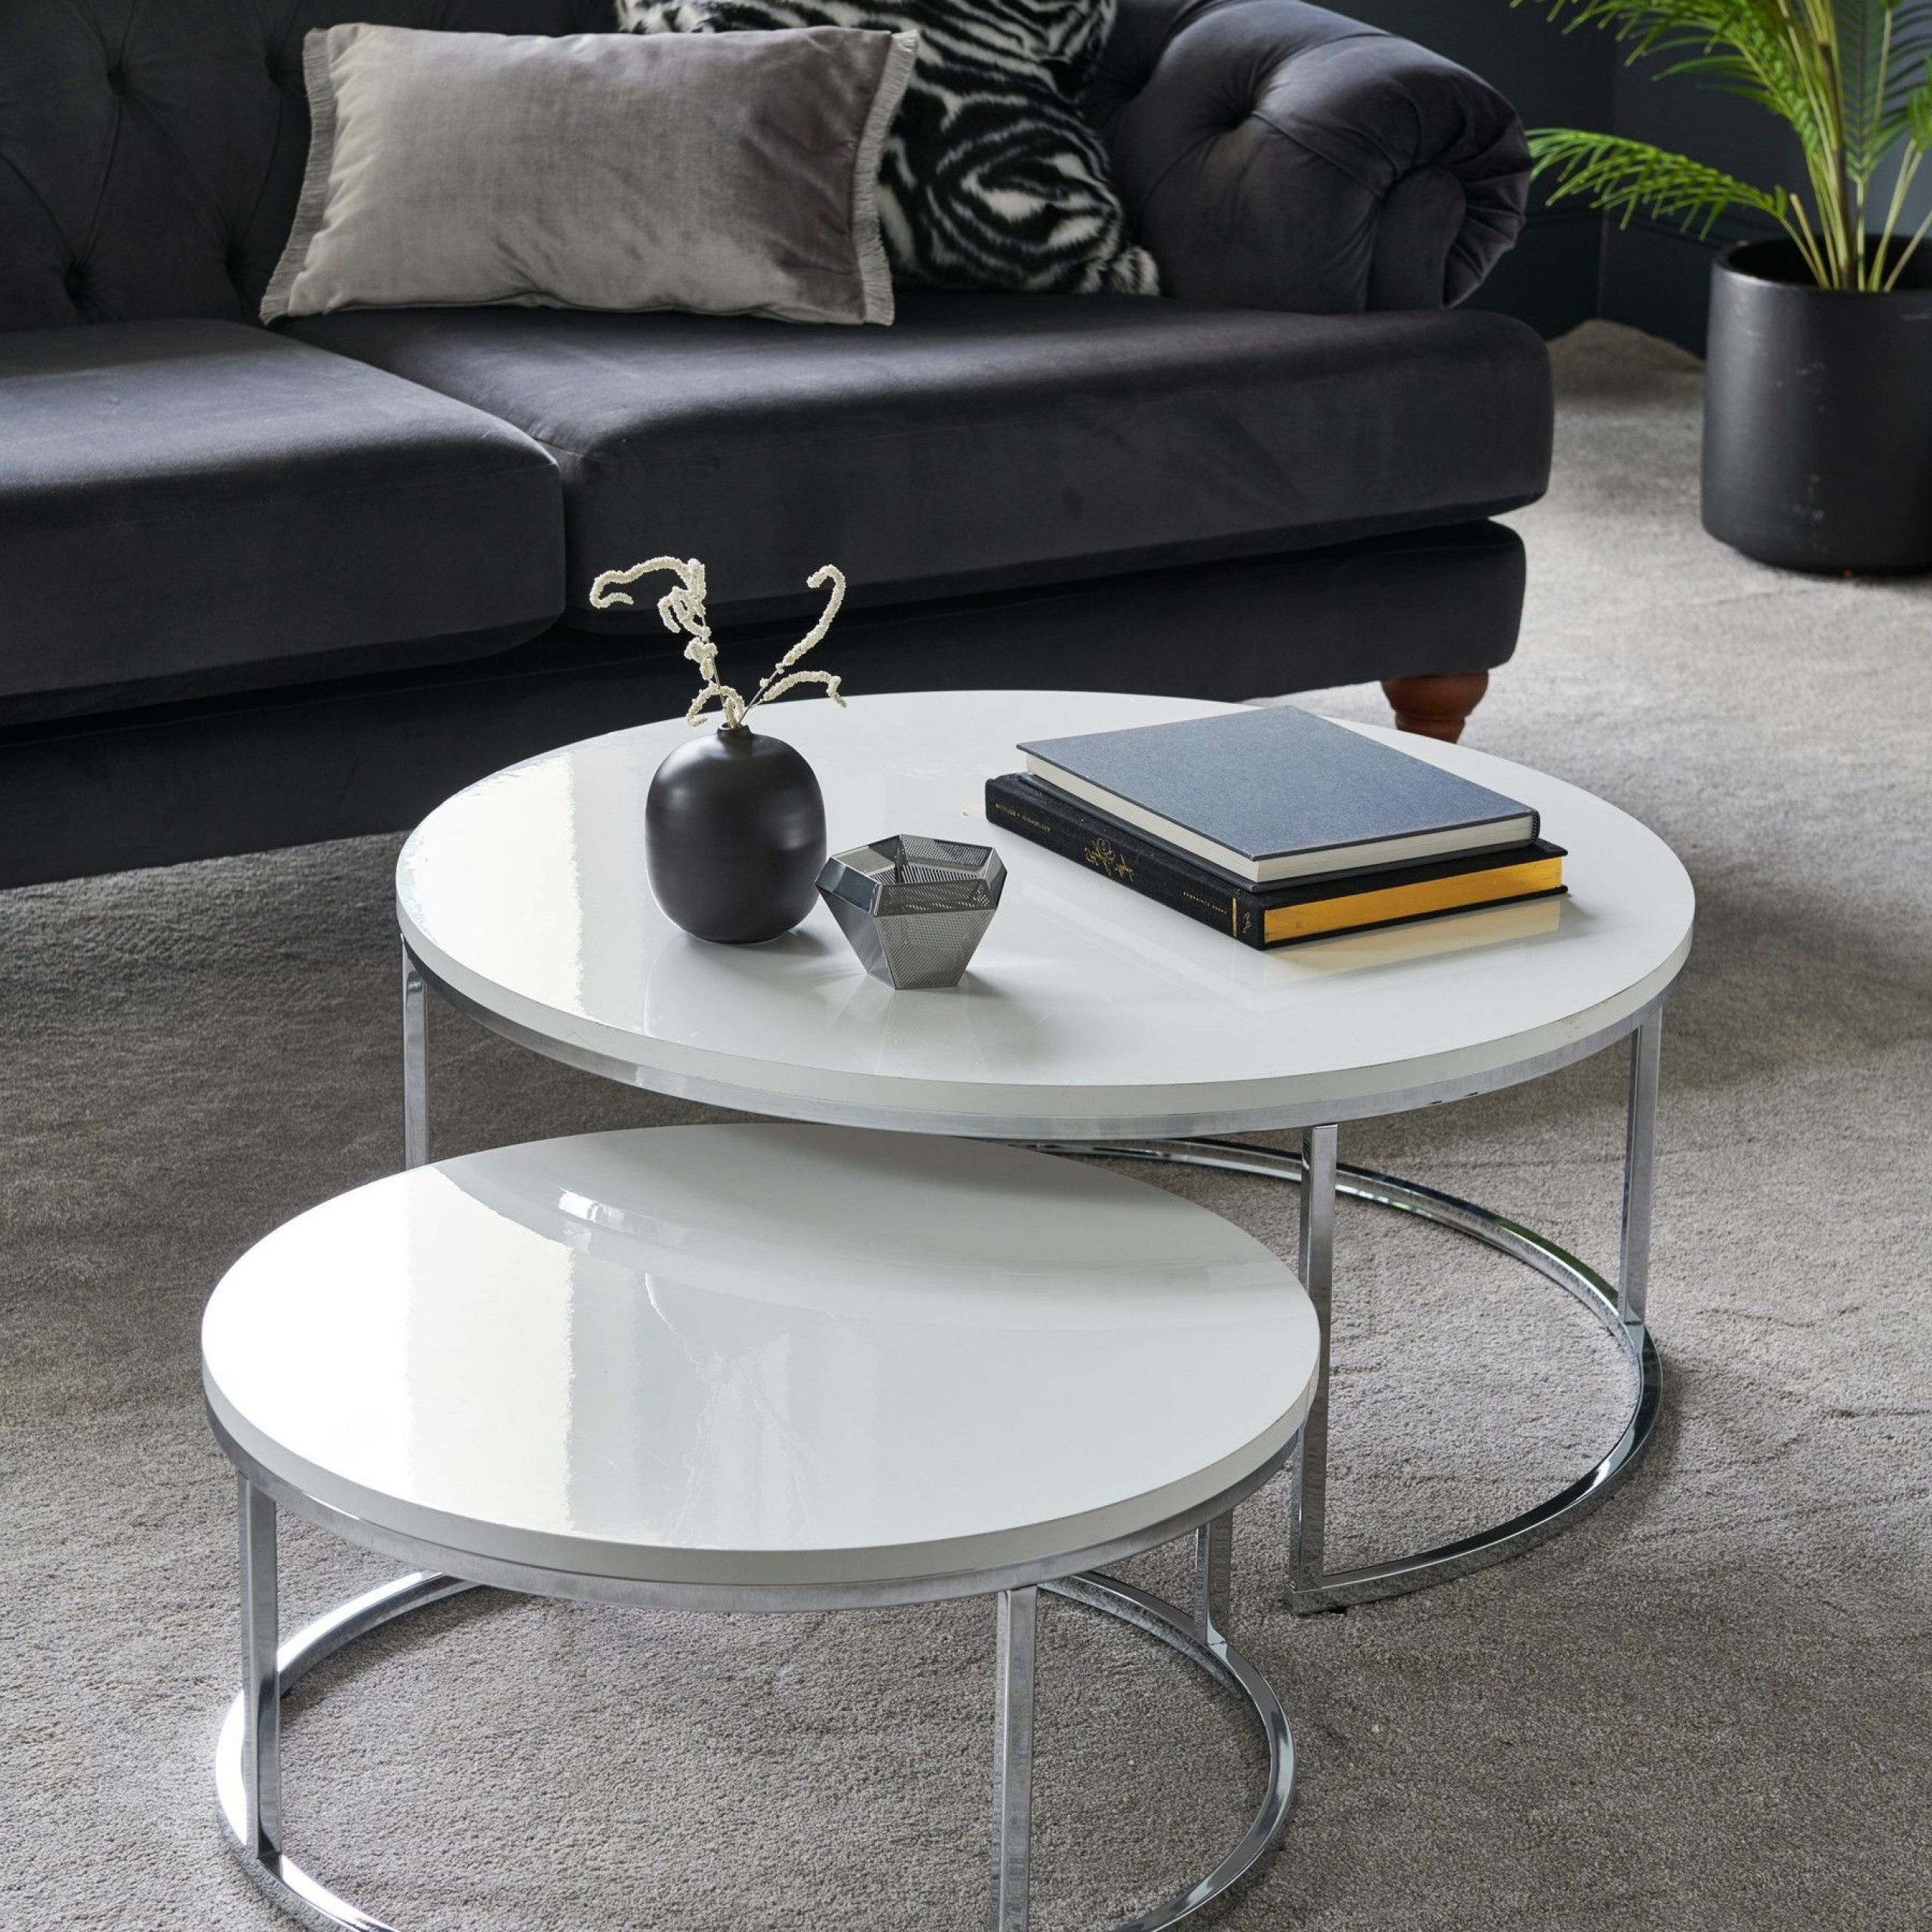 Gray And Gold Coffee Tables In Famous Buy Mode Coffee Nest Of 2 Tables From The Next Uk Online Shop (View 7 of 10)